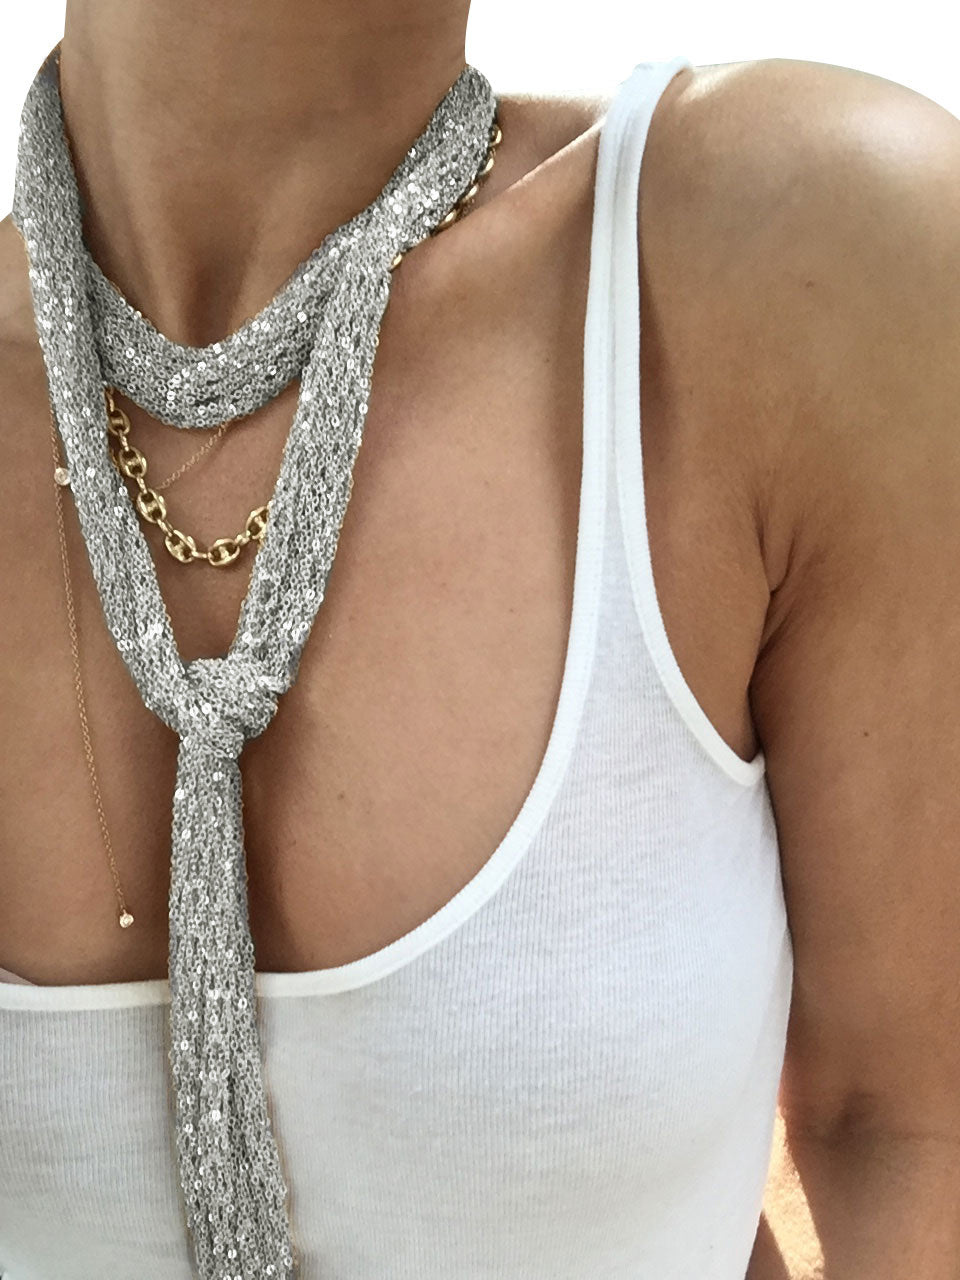 Necklace | Skinny Scarf - Patented Chain | Natalia Fedner